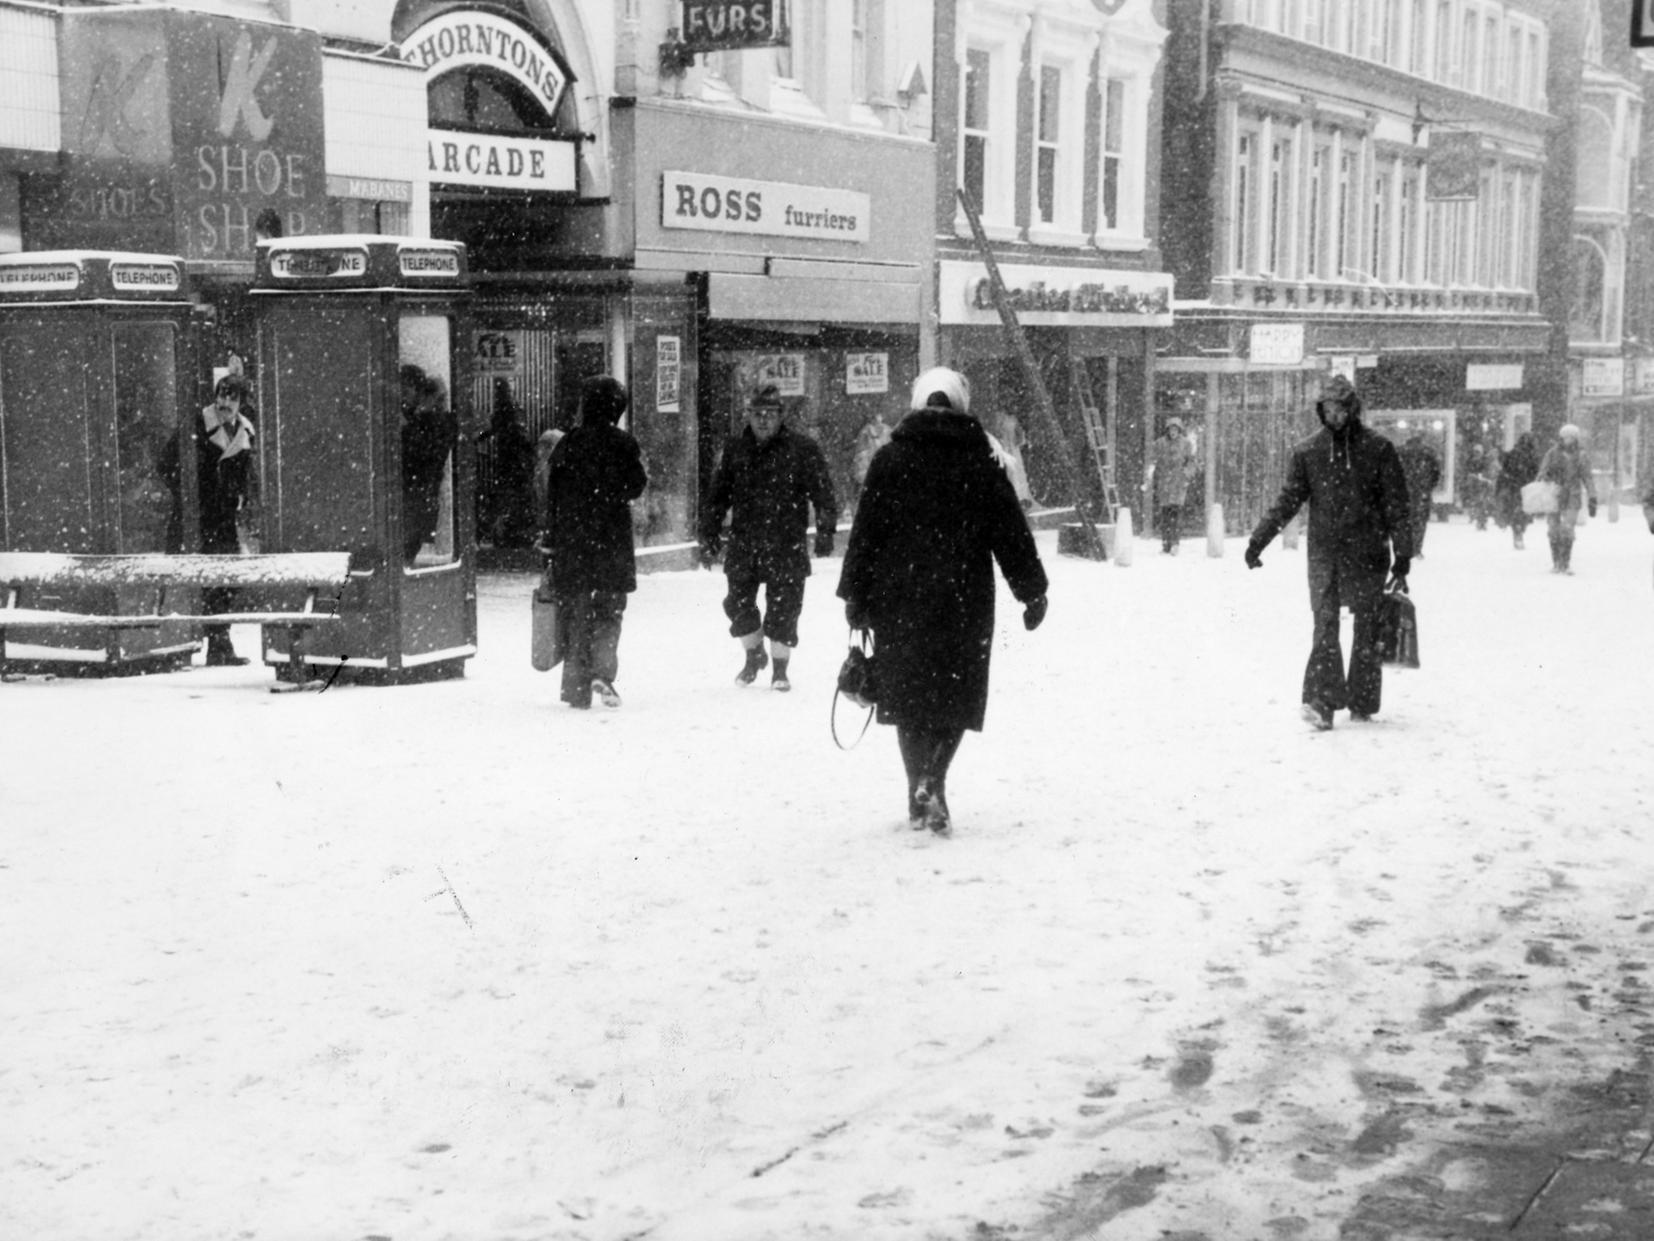 These photos showcase how Leeds coped with heavy snow down the decades.